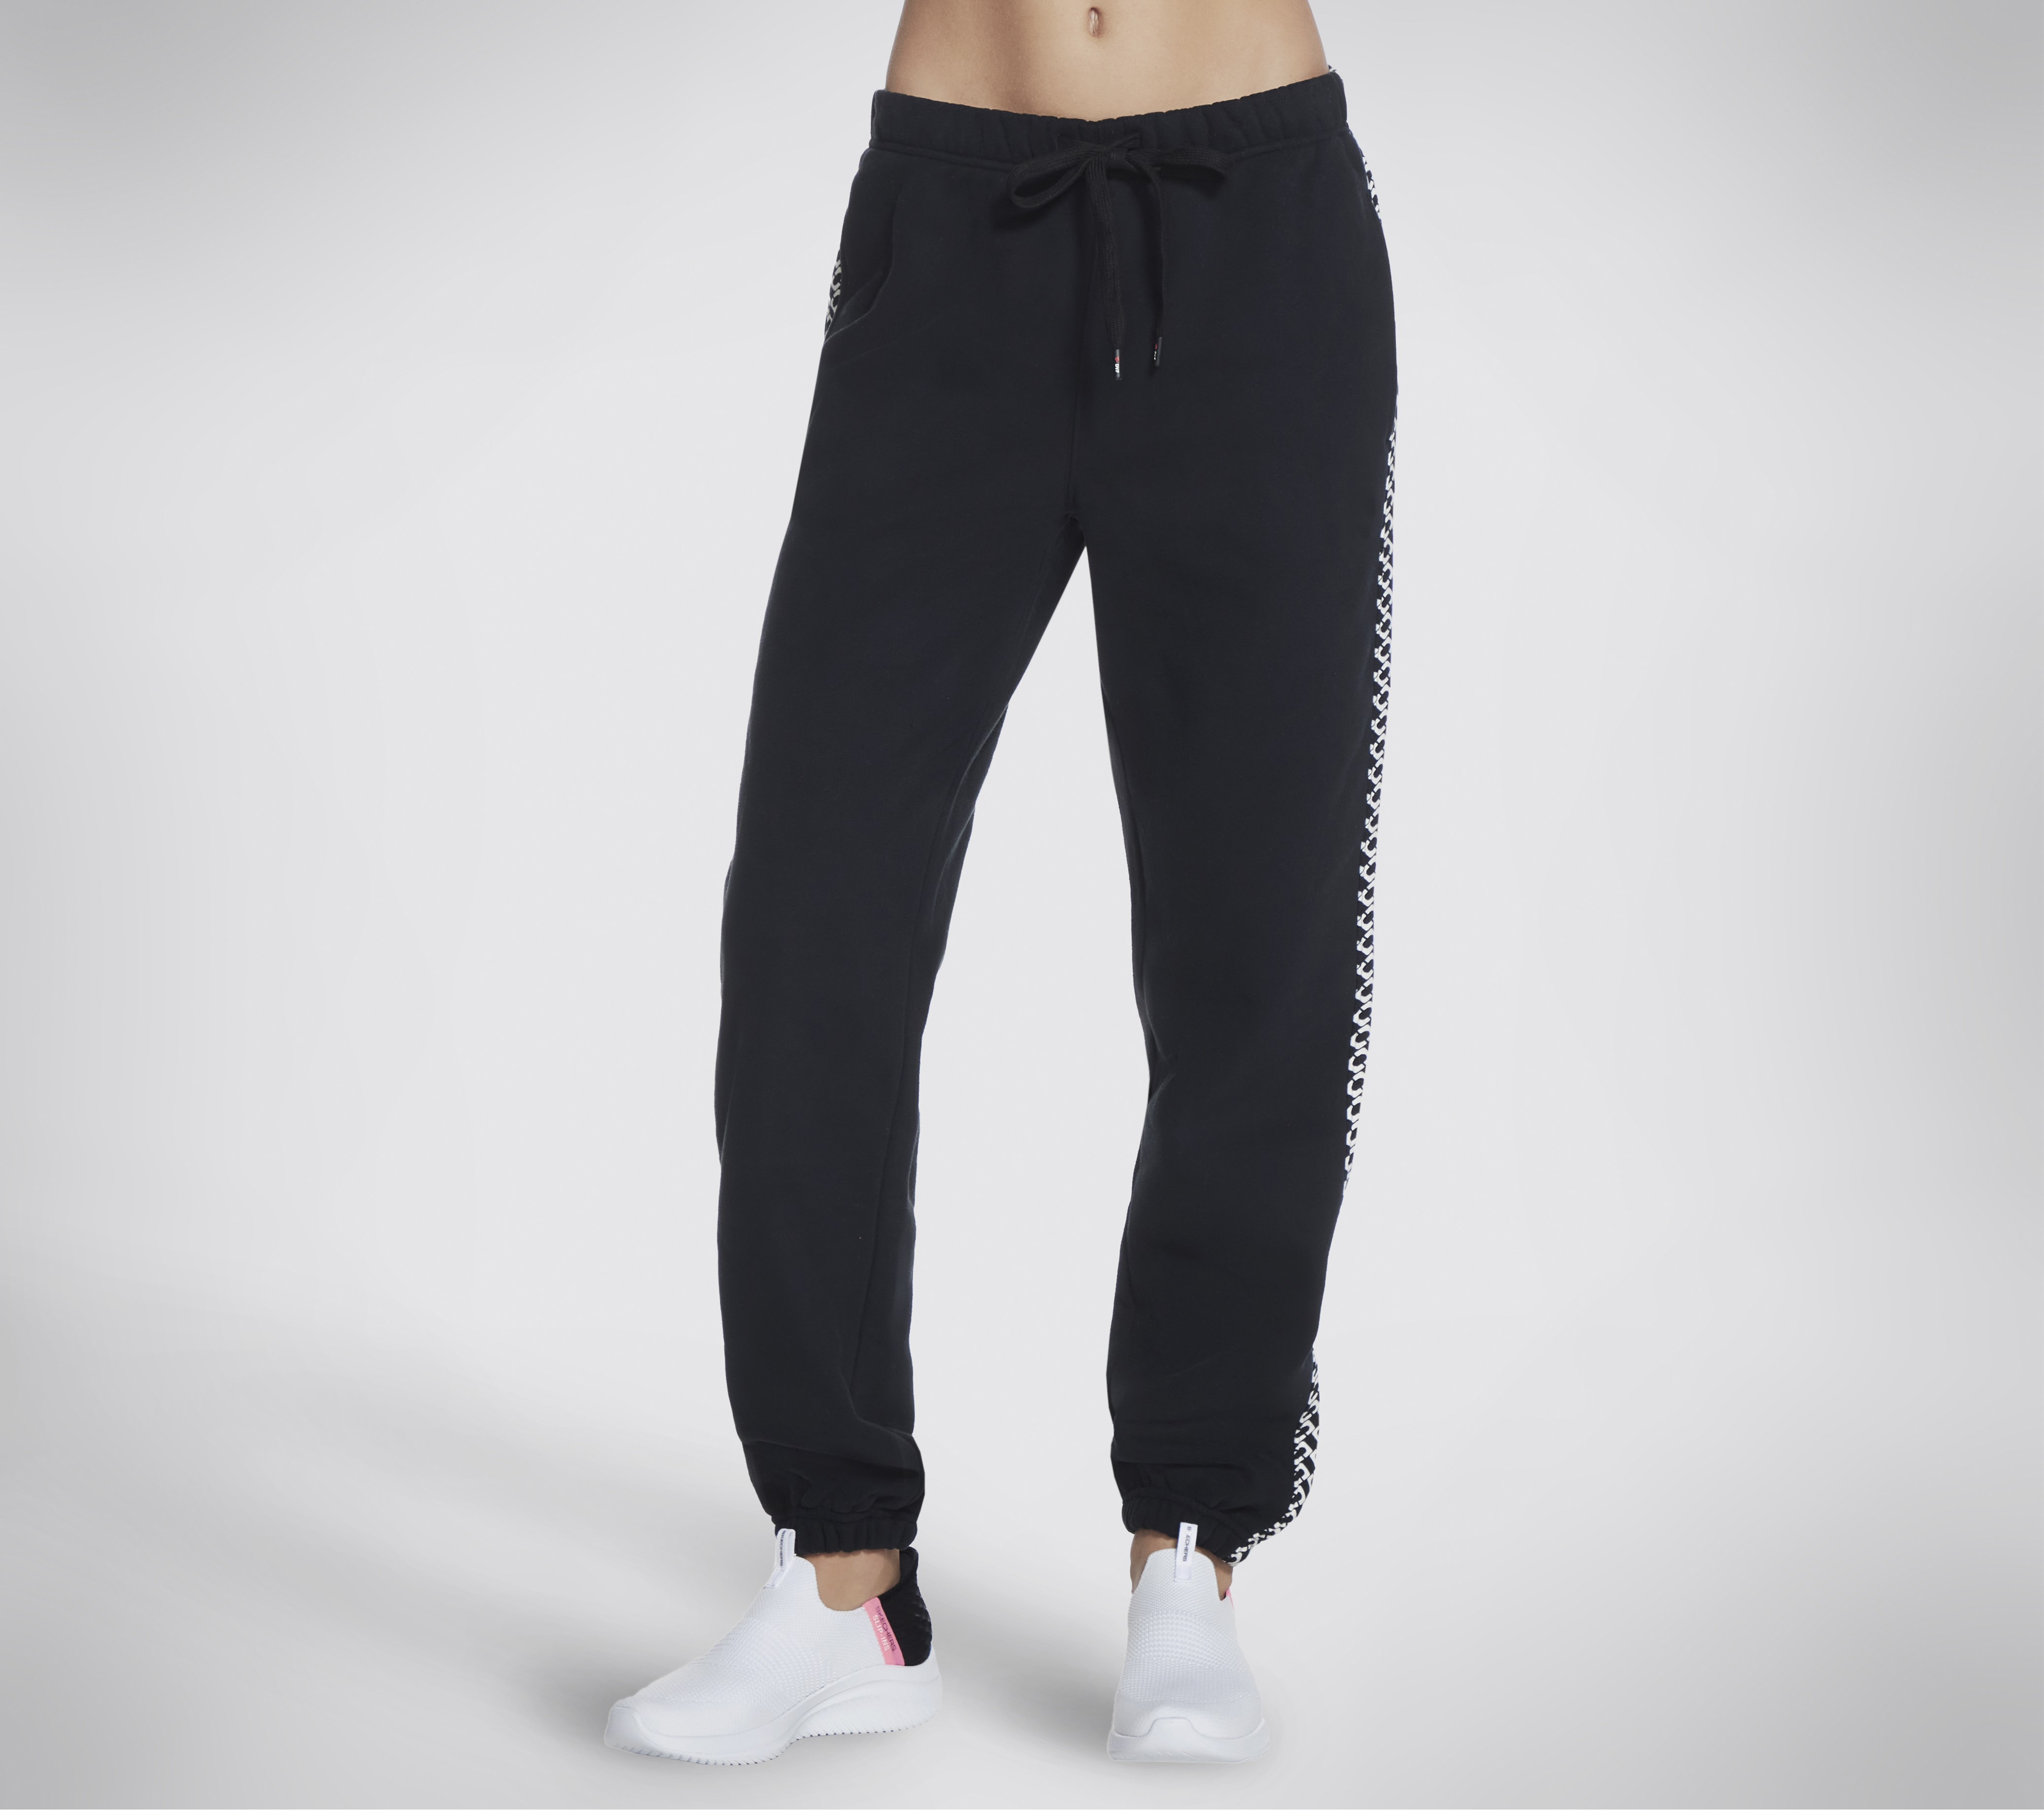 Shop the DVF: Chainlink Jogger